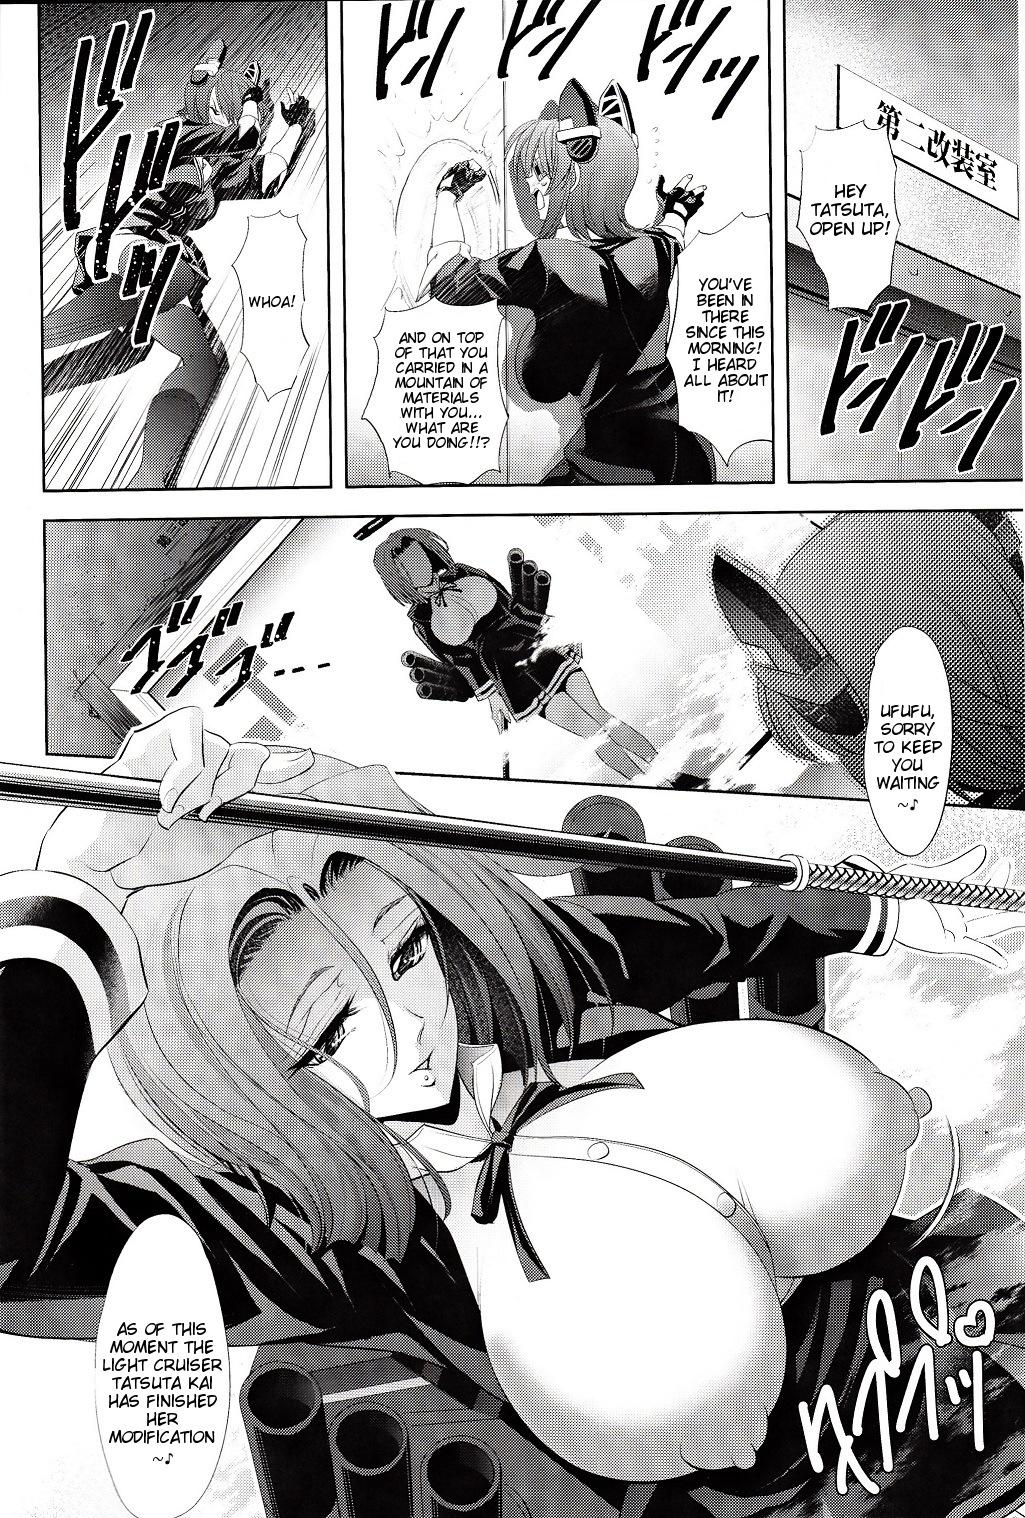 Dirty DRAGON CRIME - Kantai collection Speculum - Page 3